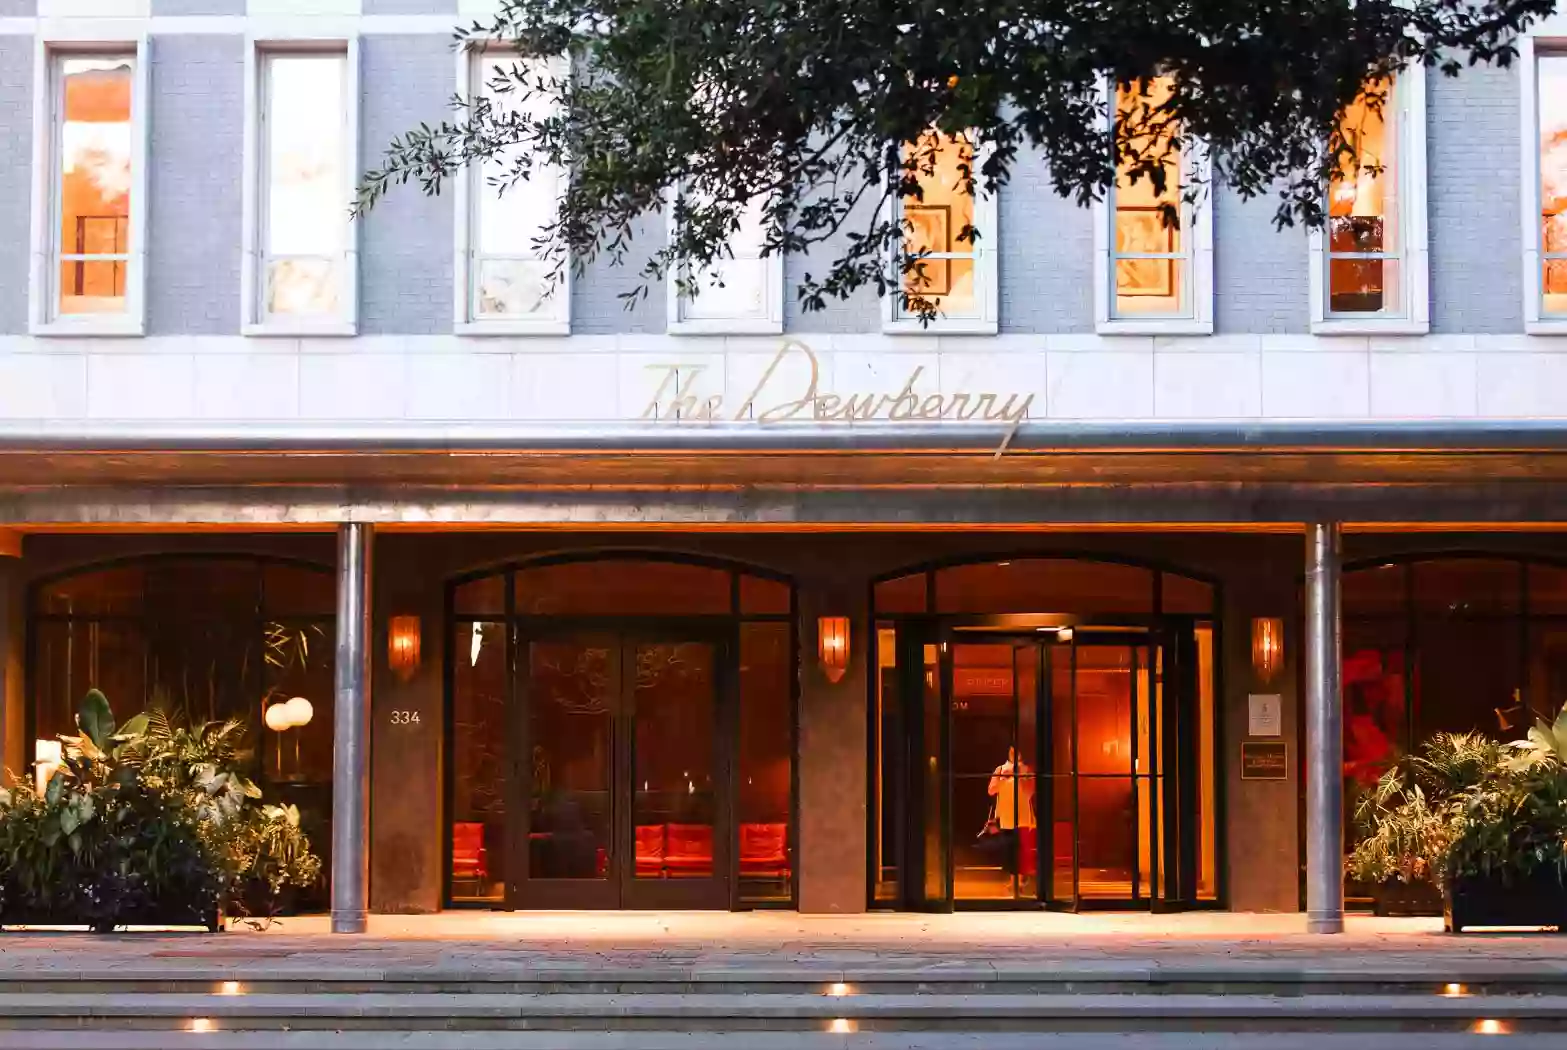 The Dewberry Spa